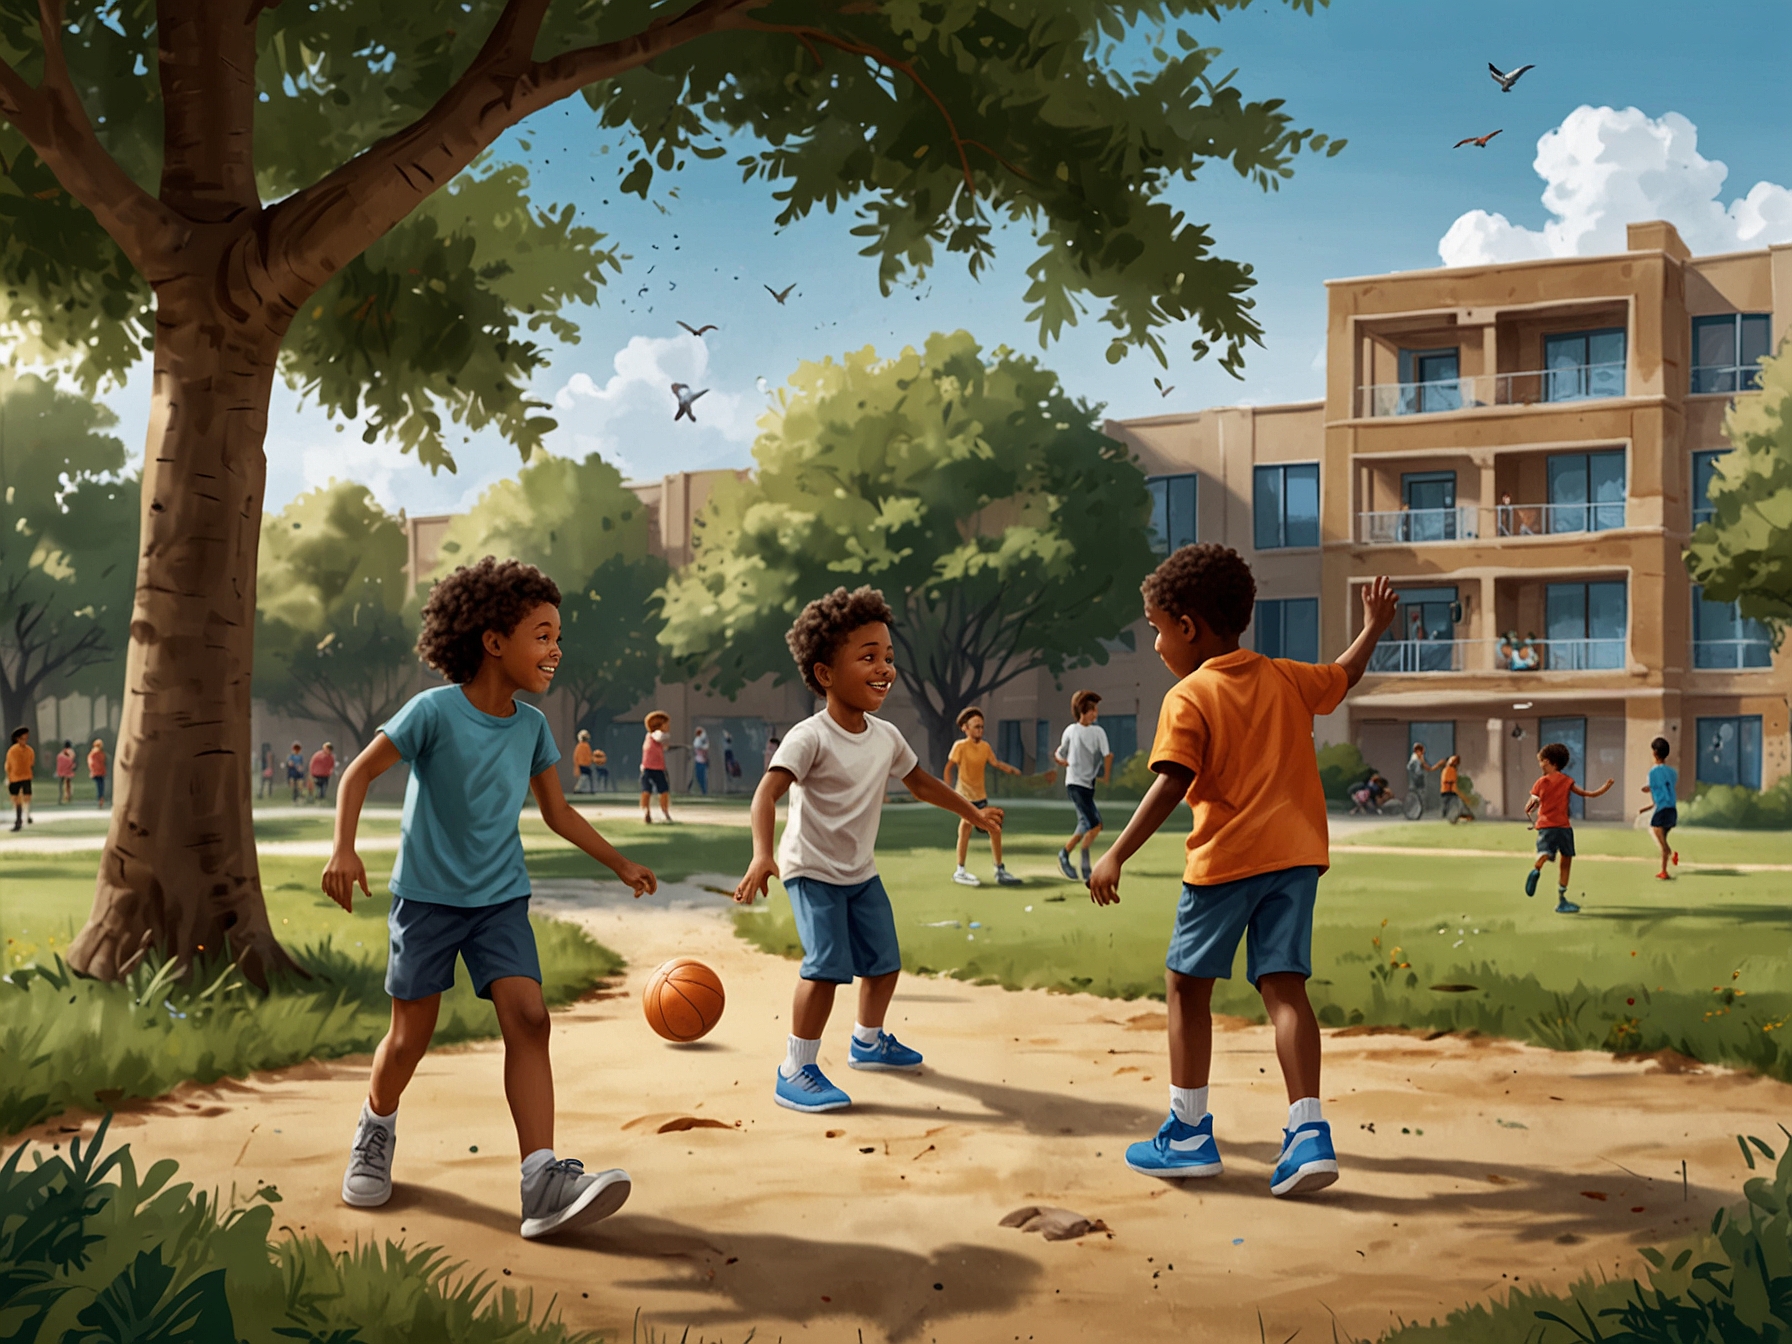 An outdoor setting where children are playing sports, drawing, and interacting with peers, emphasizing physical health, creativity, and social skills in the holistic development of children.